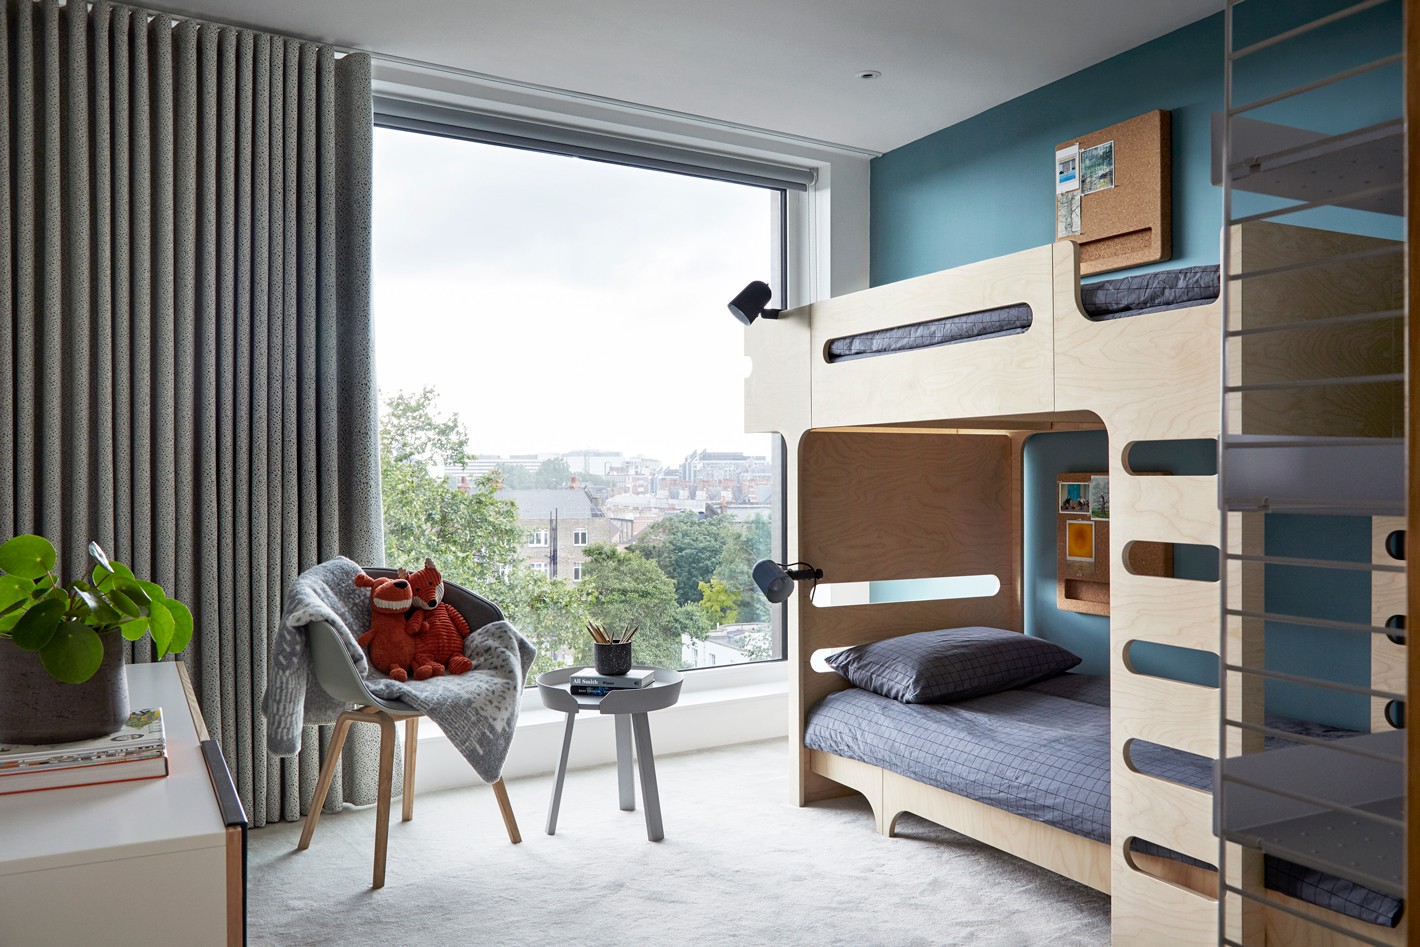 15 Amazing Scandinavian Kids' Room Designs For Rest And Play